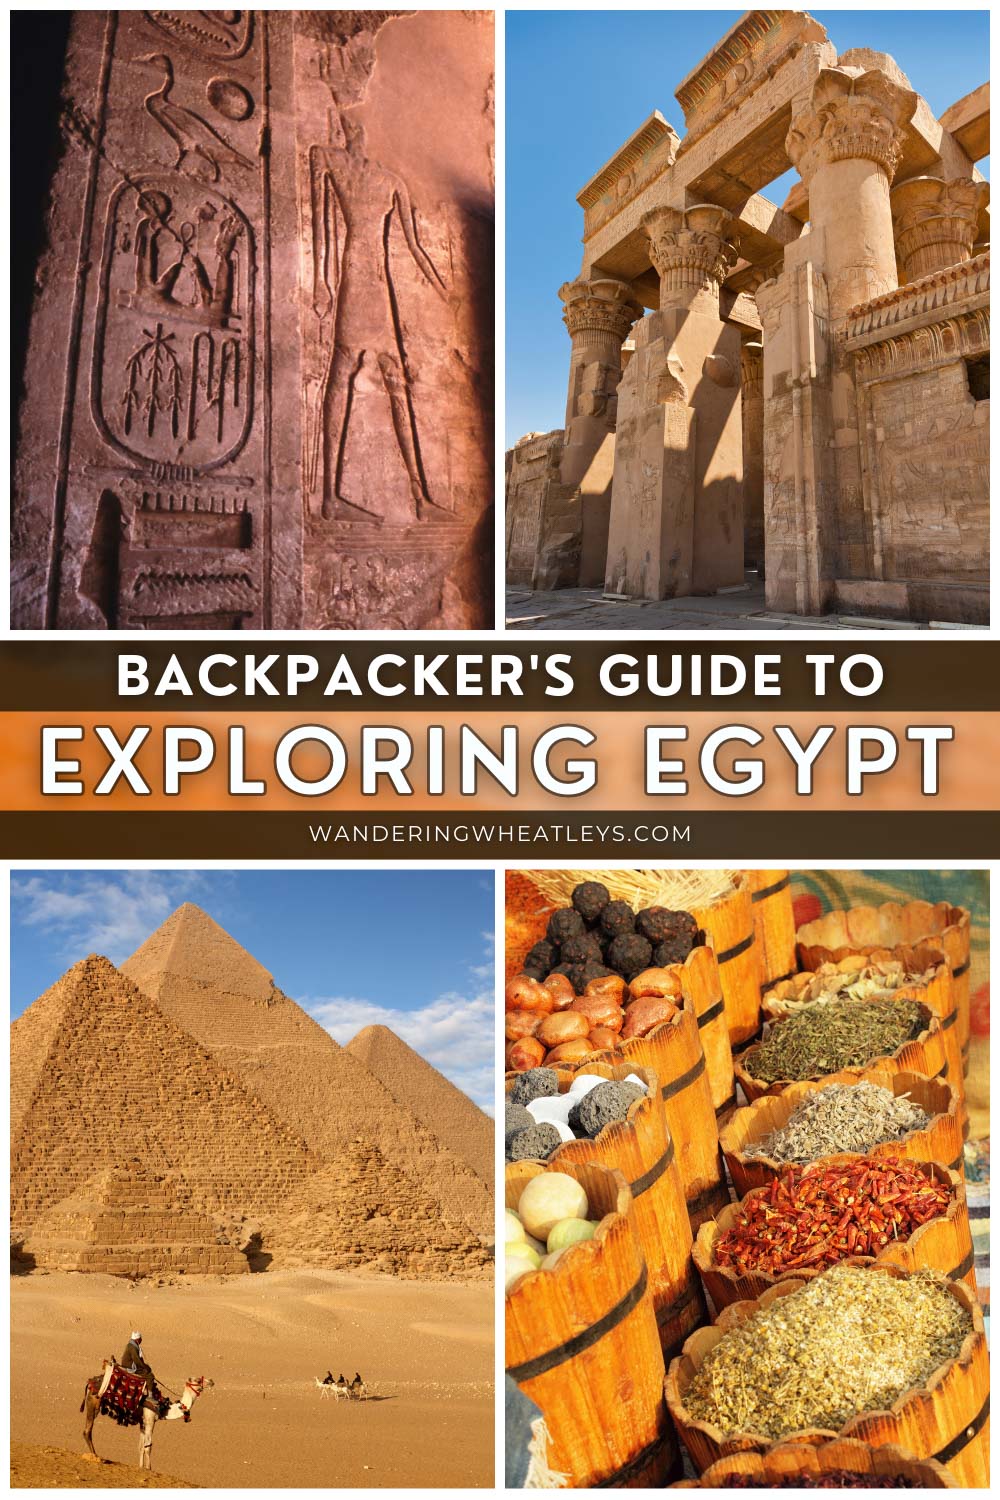 The Ultimate Guide To Backpacking Around Egypt - Ultimate GuiDe To Backpacking ArounD Egypt Pinterest 2